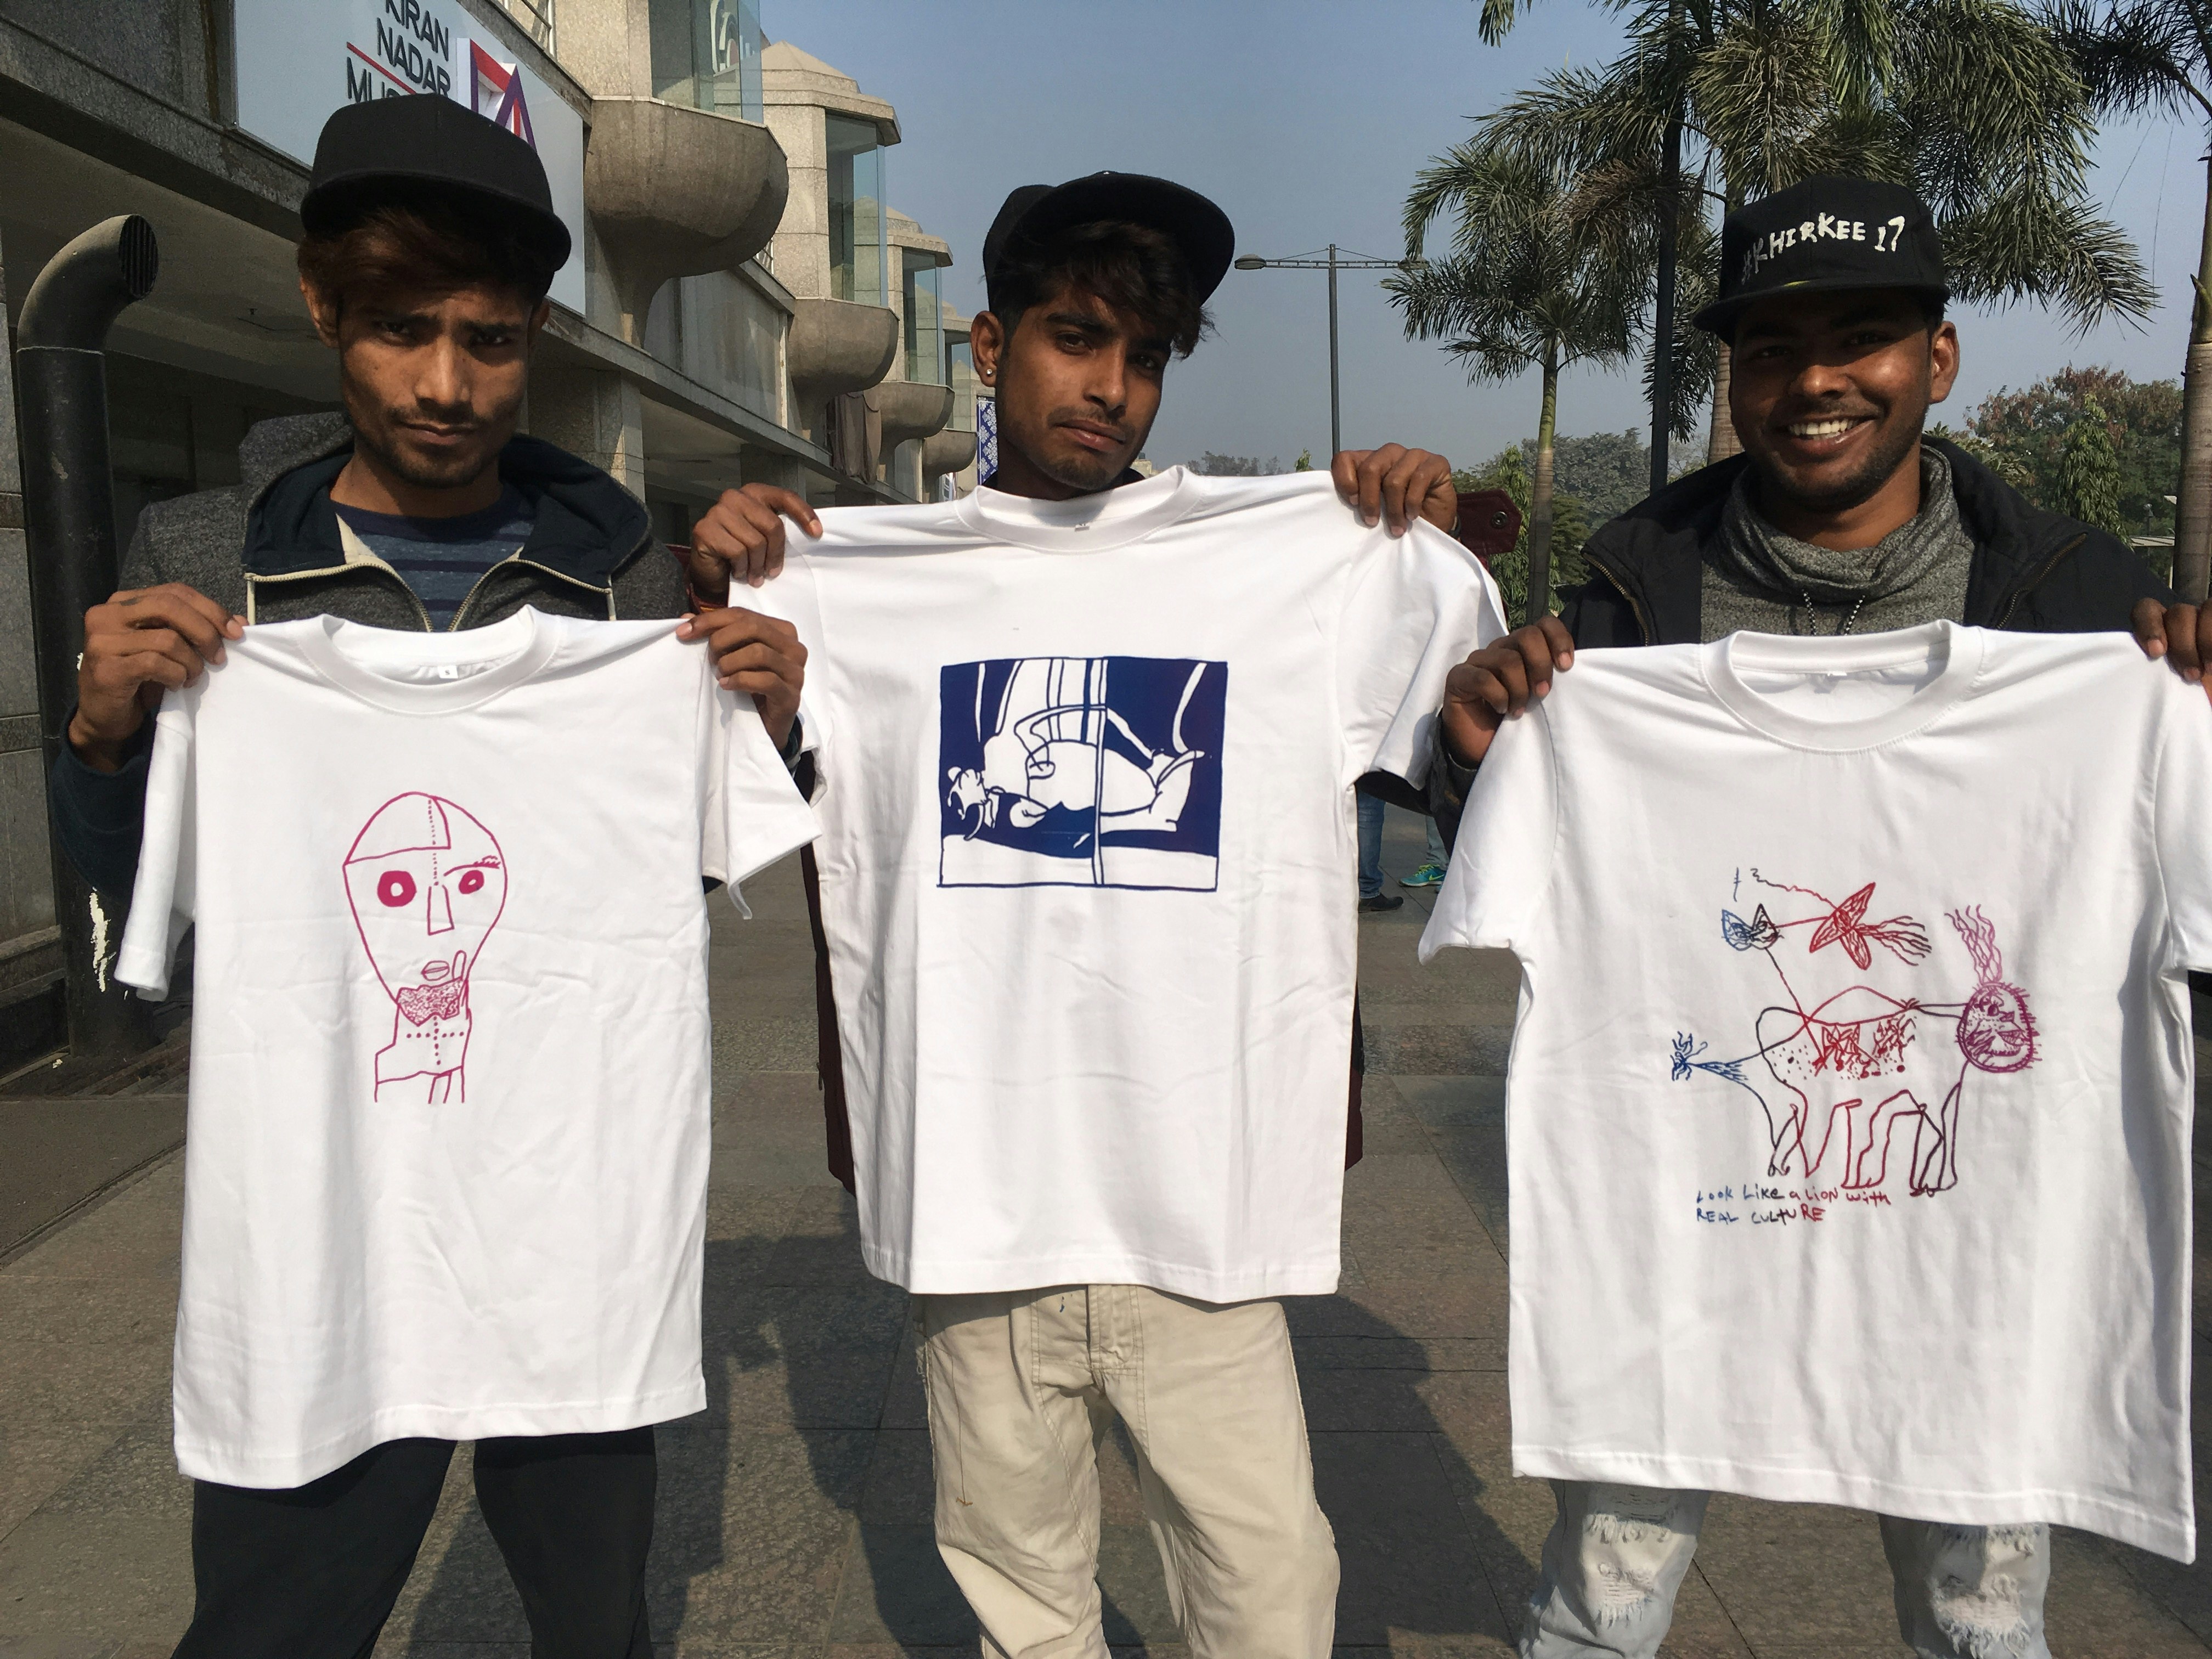 Three male-presenting figures stand holding up white screen-printed shirts.